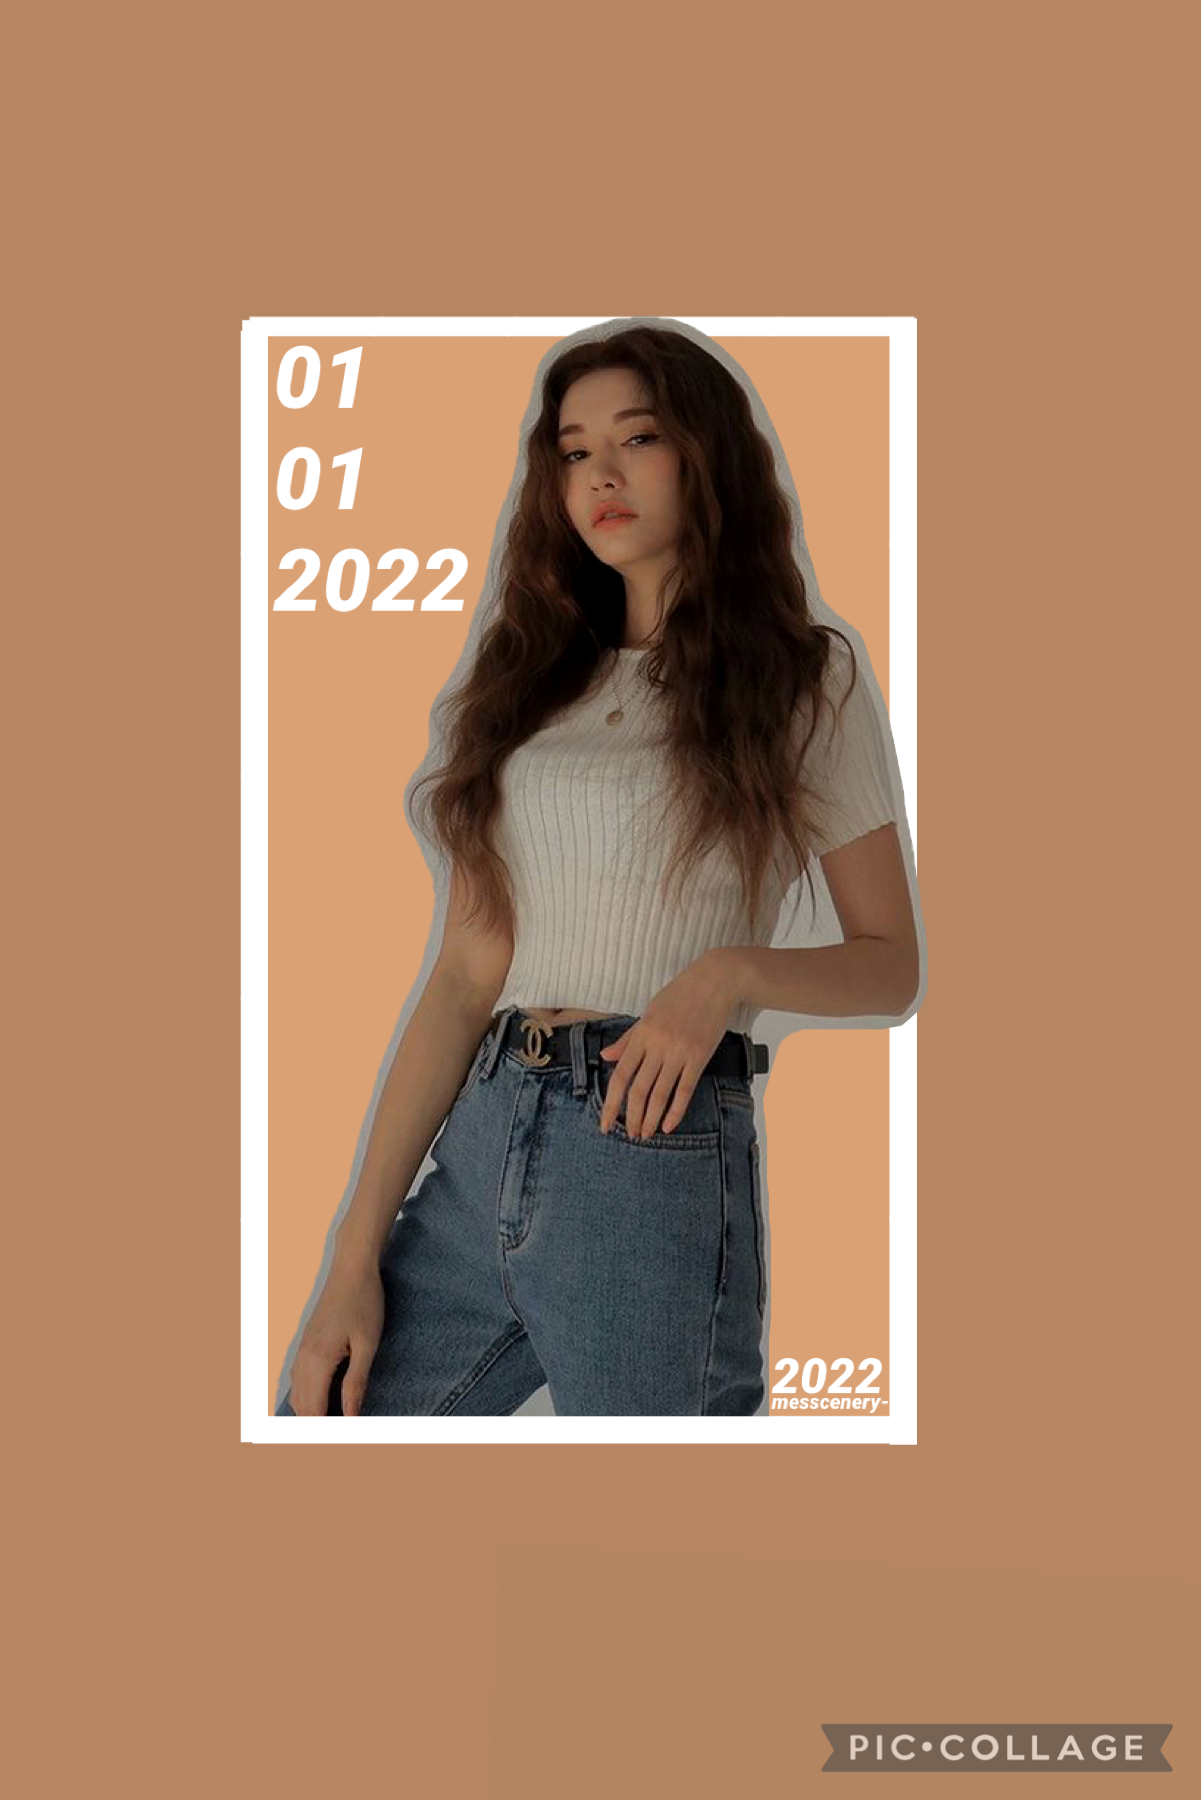 🔖01/01/22🔖
happy new year!!
i honestly can’t believe that it’s already 2022, times just flies too fast. wanted to try smtg new like a magazine/album cover but it didn’t turn out how it looked like in my mind. definitely not my fav or best but ig I tried